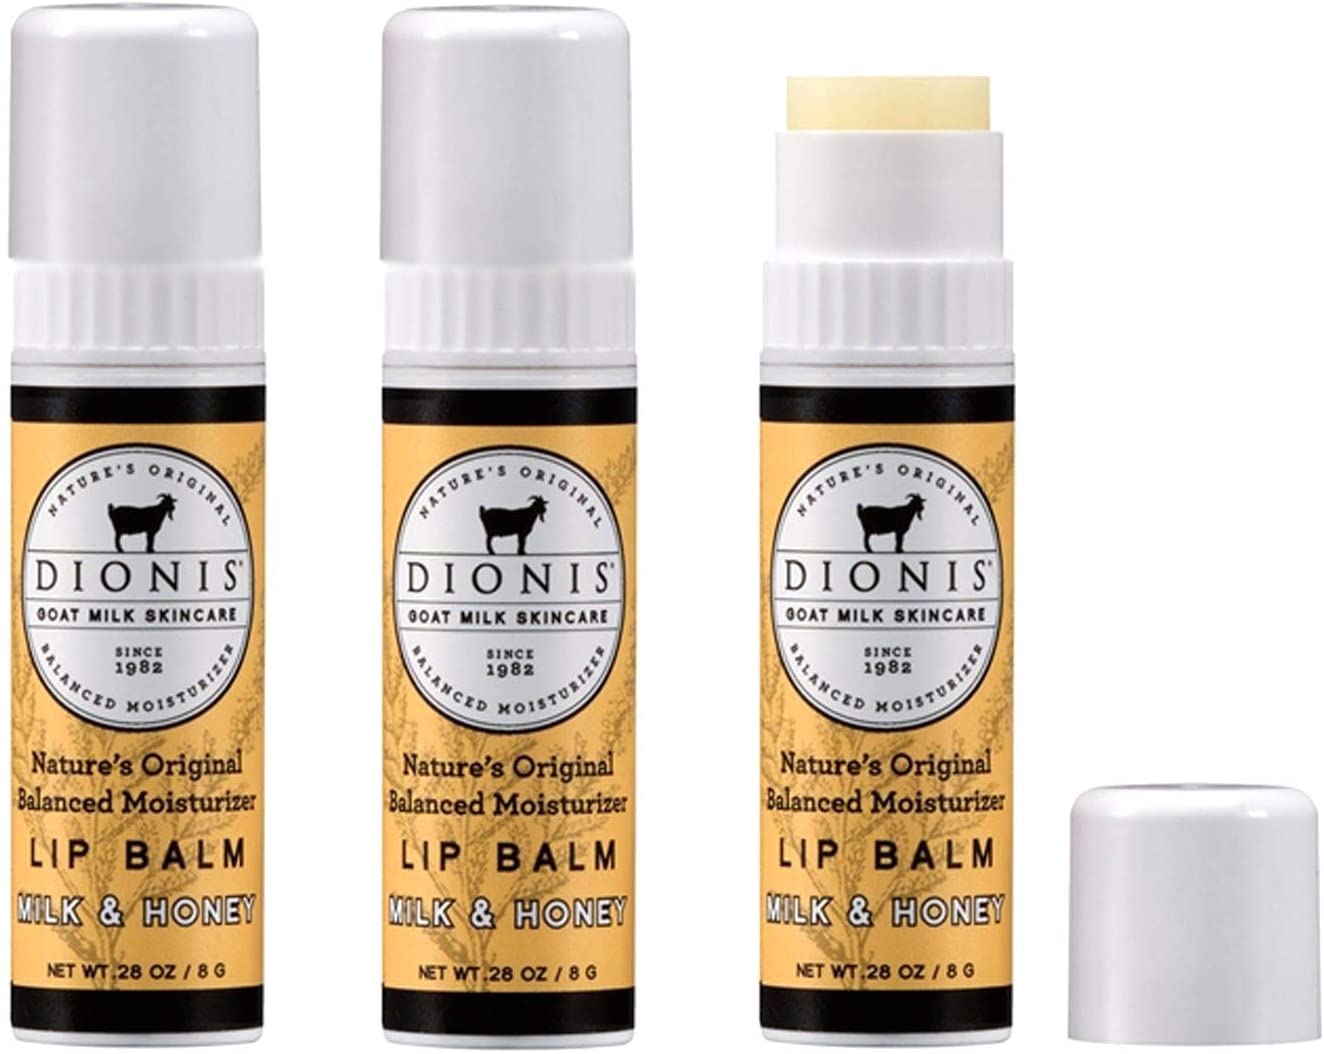 Dionis Goat Milk Lip Balm Set of 3 Enriched with Beeswax, Shea Butter, and Coconut Oil for Intensive Lip Care